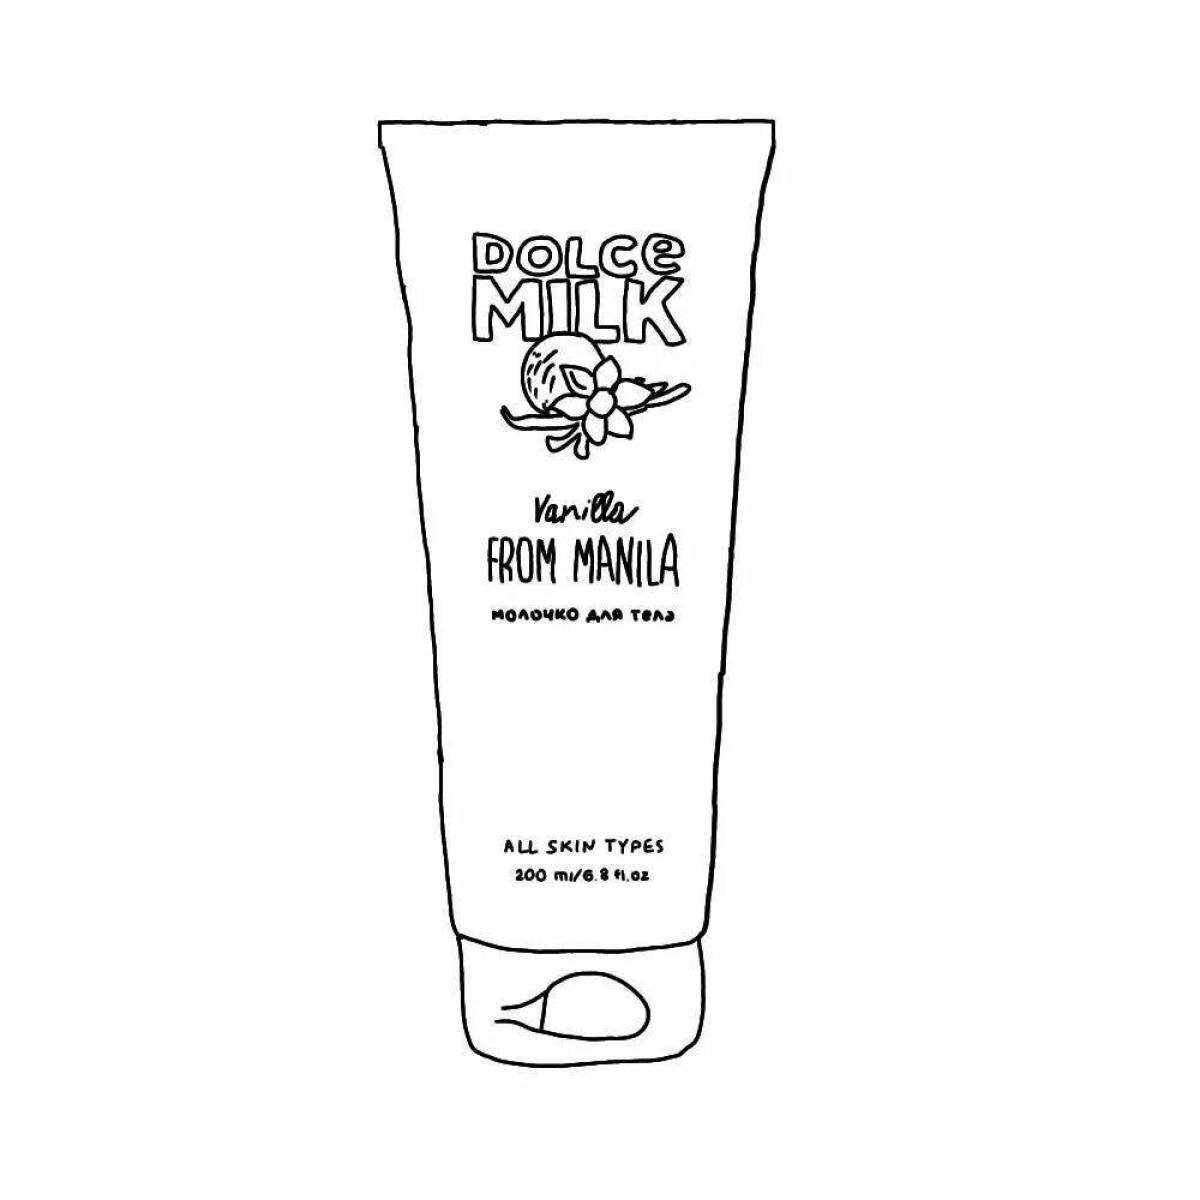 Dolce milk blooming coloring page